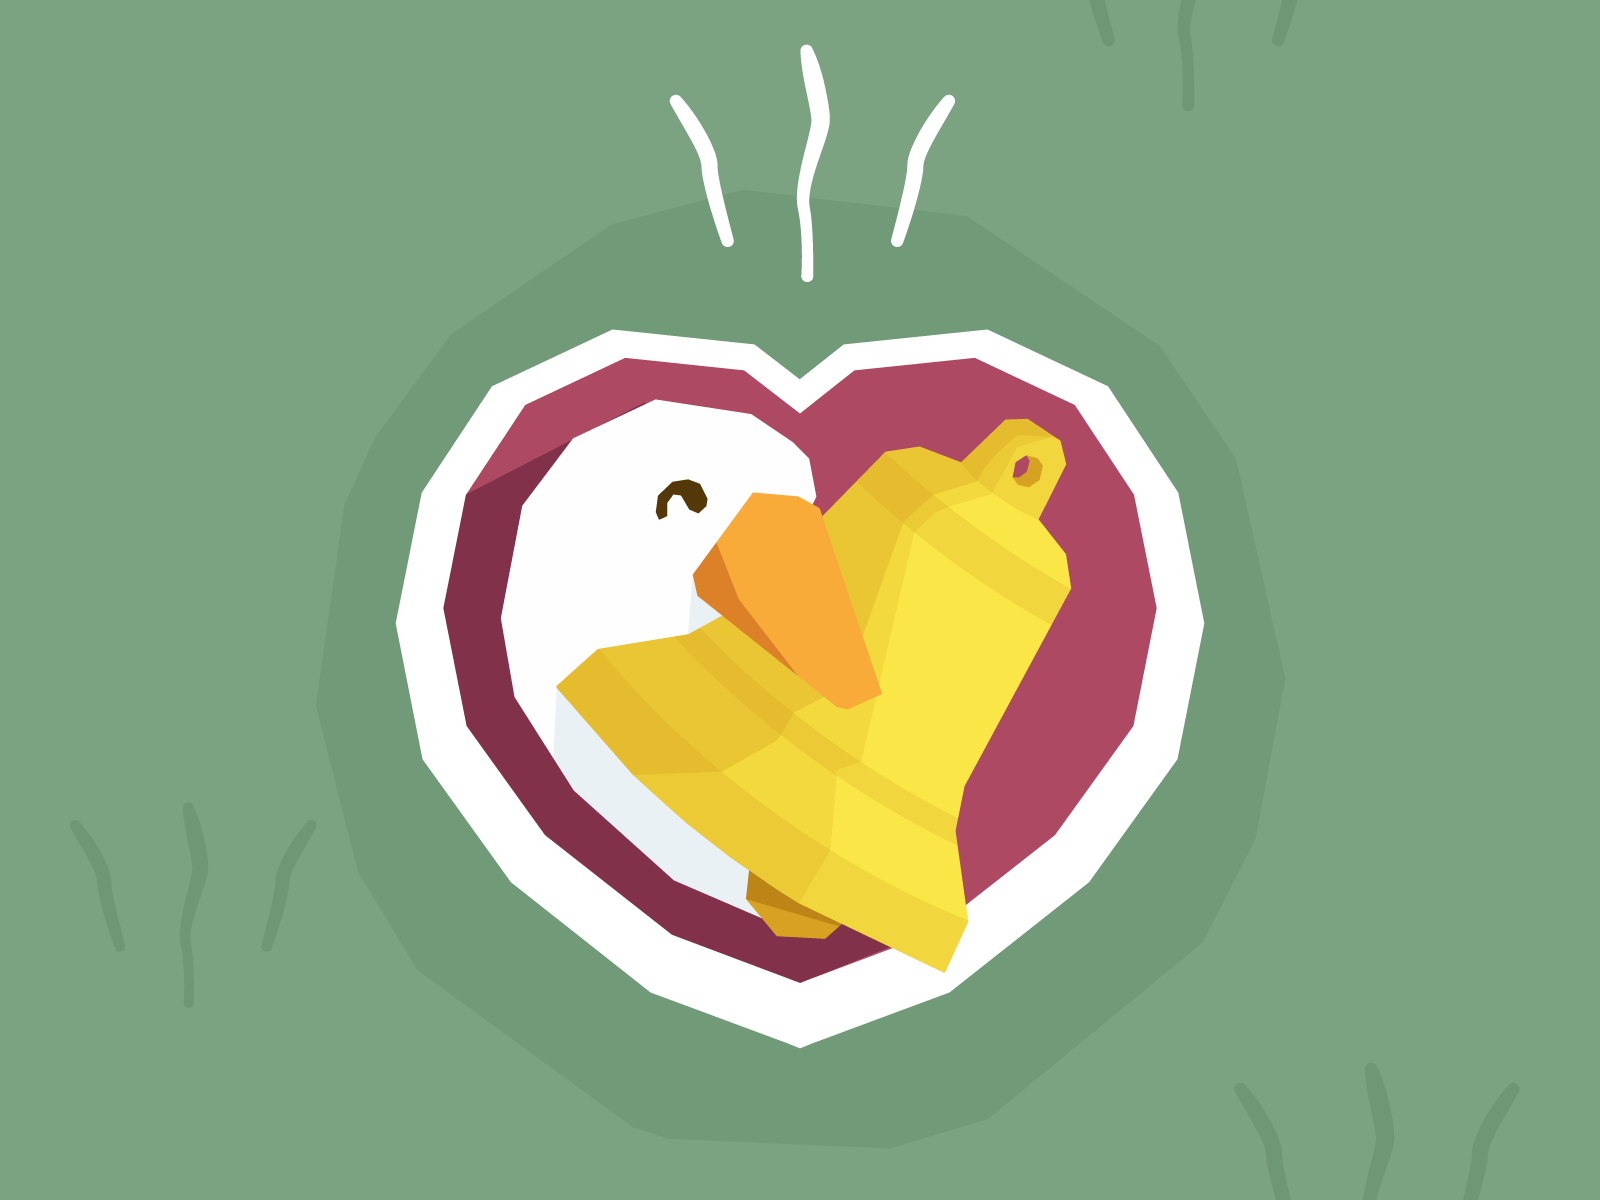 Goosed bell desaturated fanart game gif goose grass heart honk love lowpoly noise sound vector video videogame